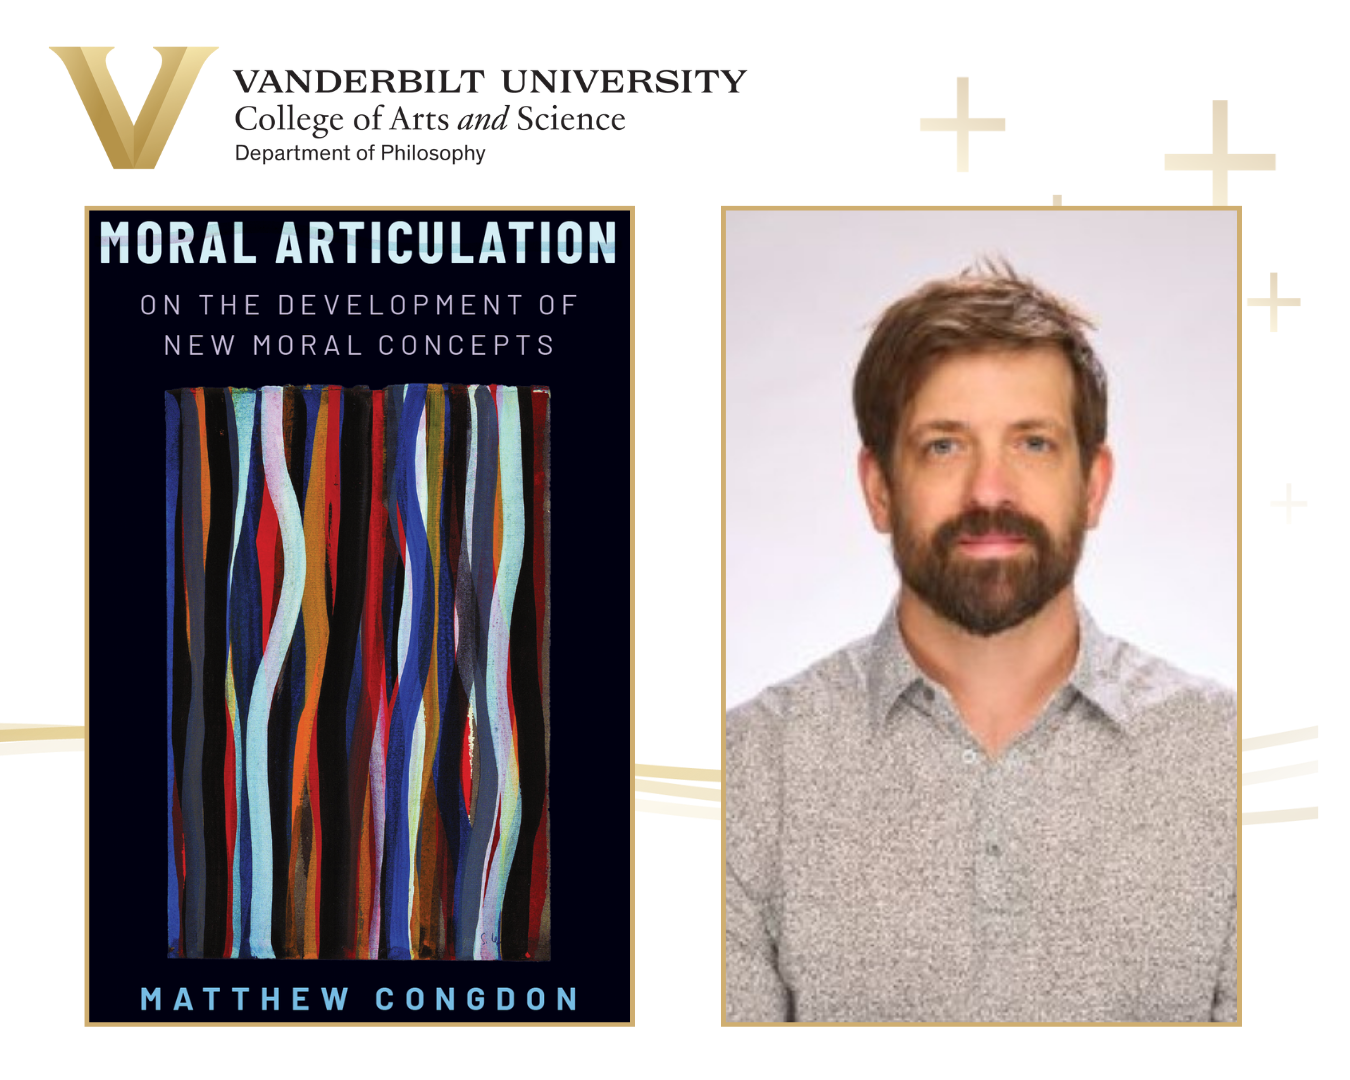 Moral Articulation by Assistant Professor Matthew Congdon was published November 2023